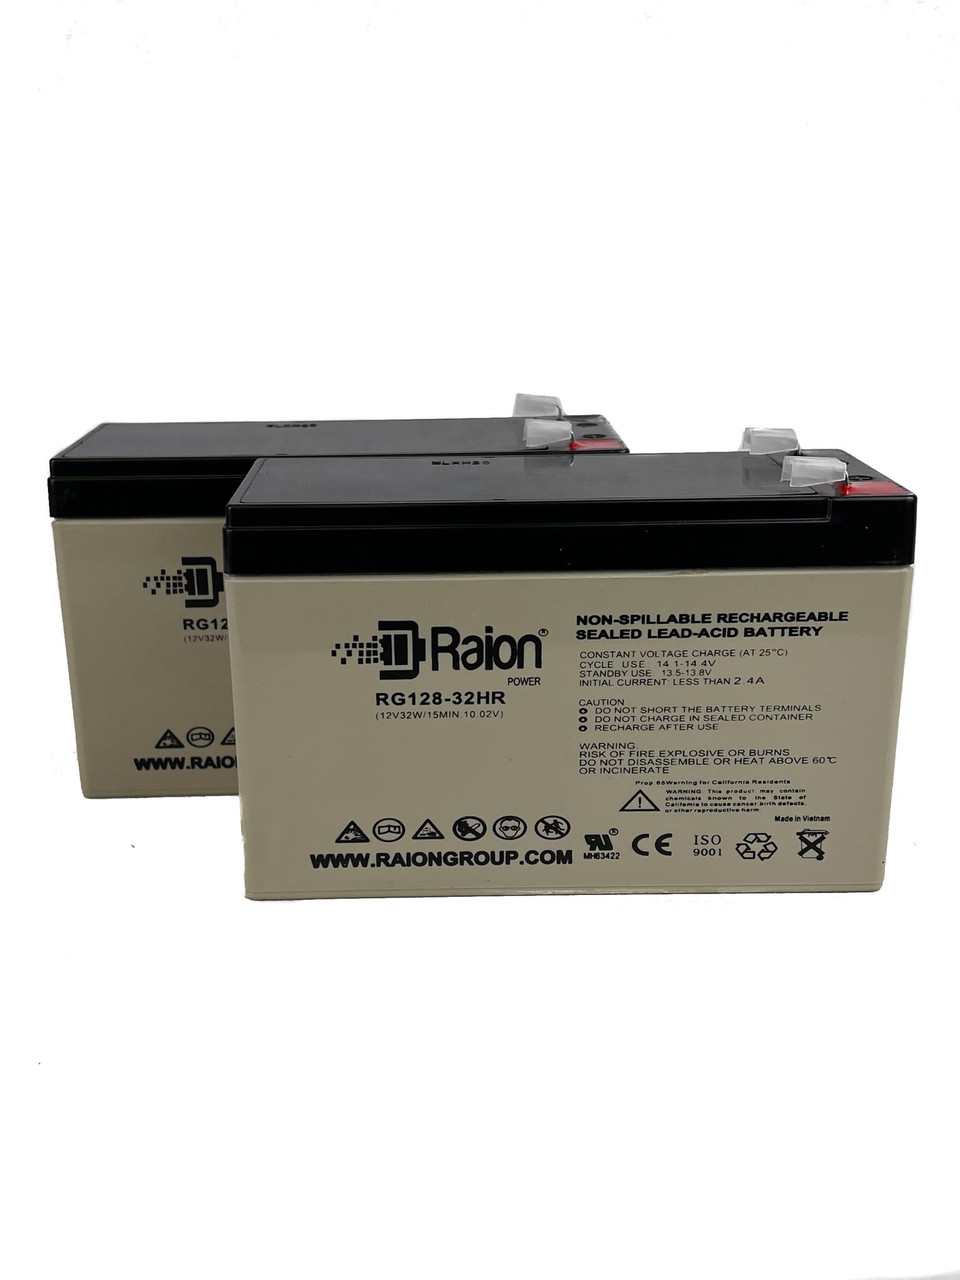 Raion Power 12V 7.5Ah High Rate Discharge UPS Batteries for Sola Series 3000 700 - 2 Pack